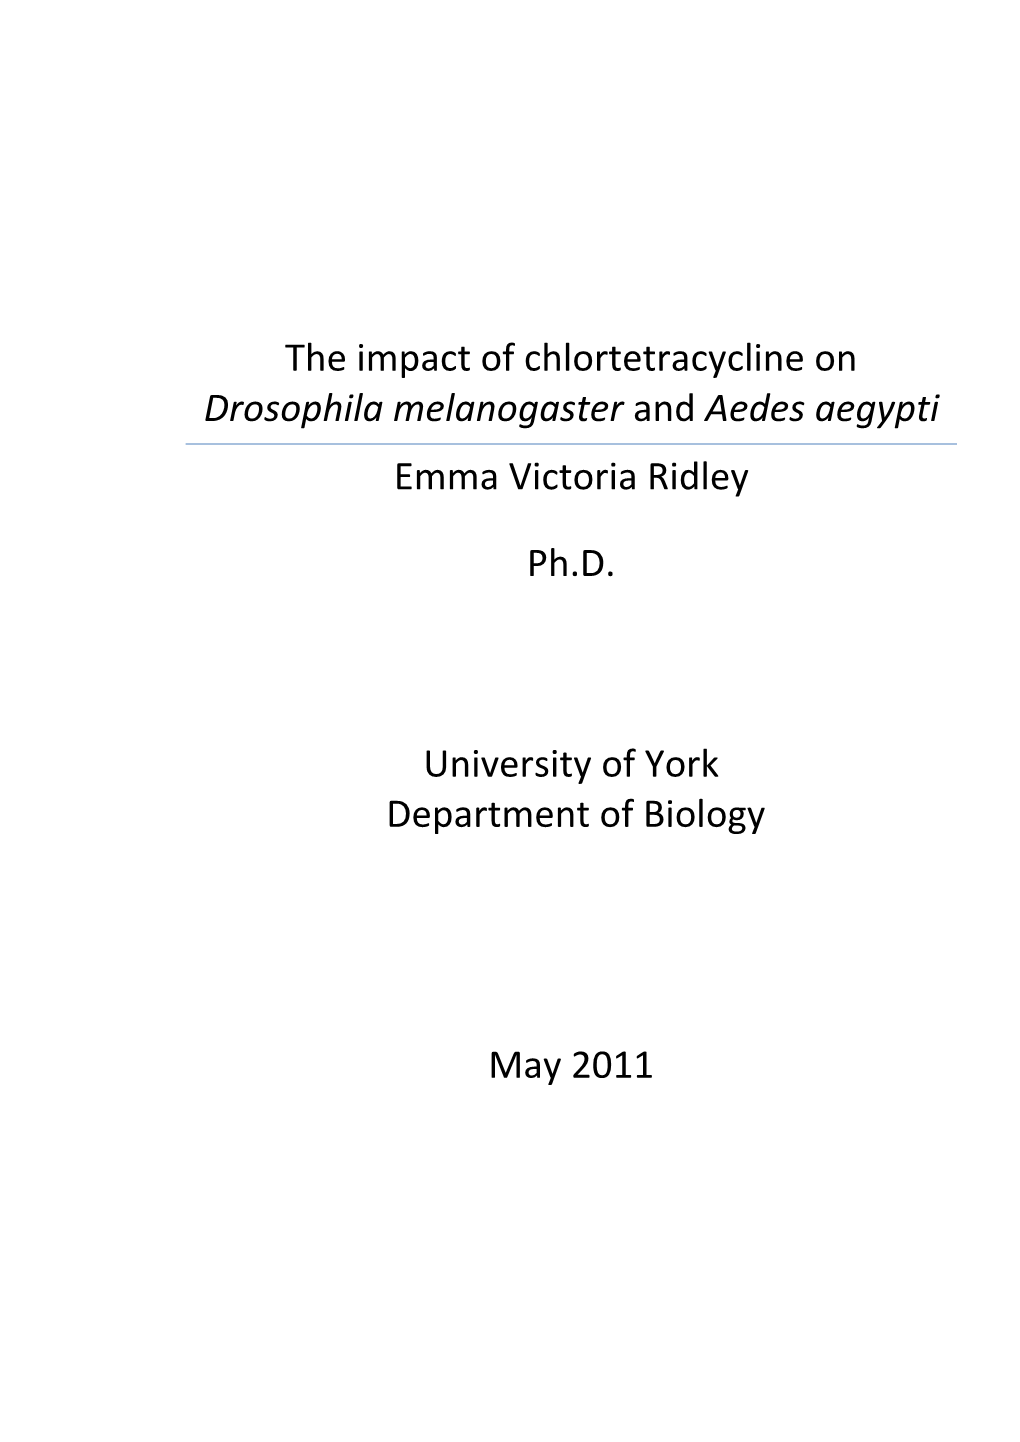 The Impact of Chlortetracycline on Drosophila Melanogaster and Aedes Aegypti Emma Victoria Ridley